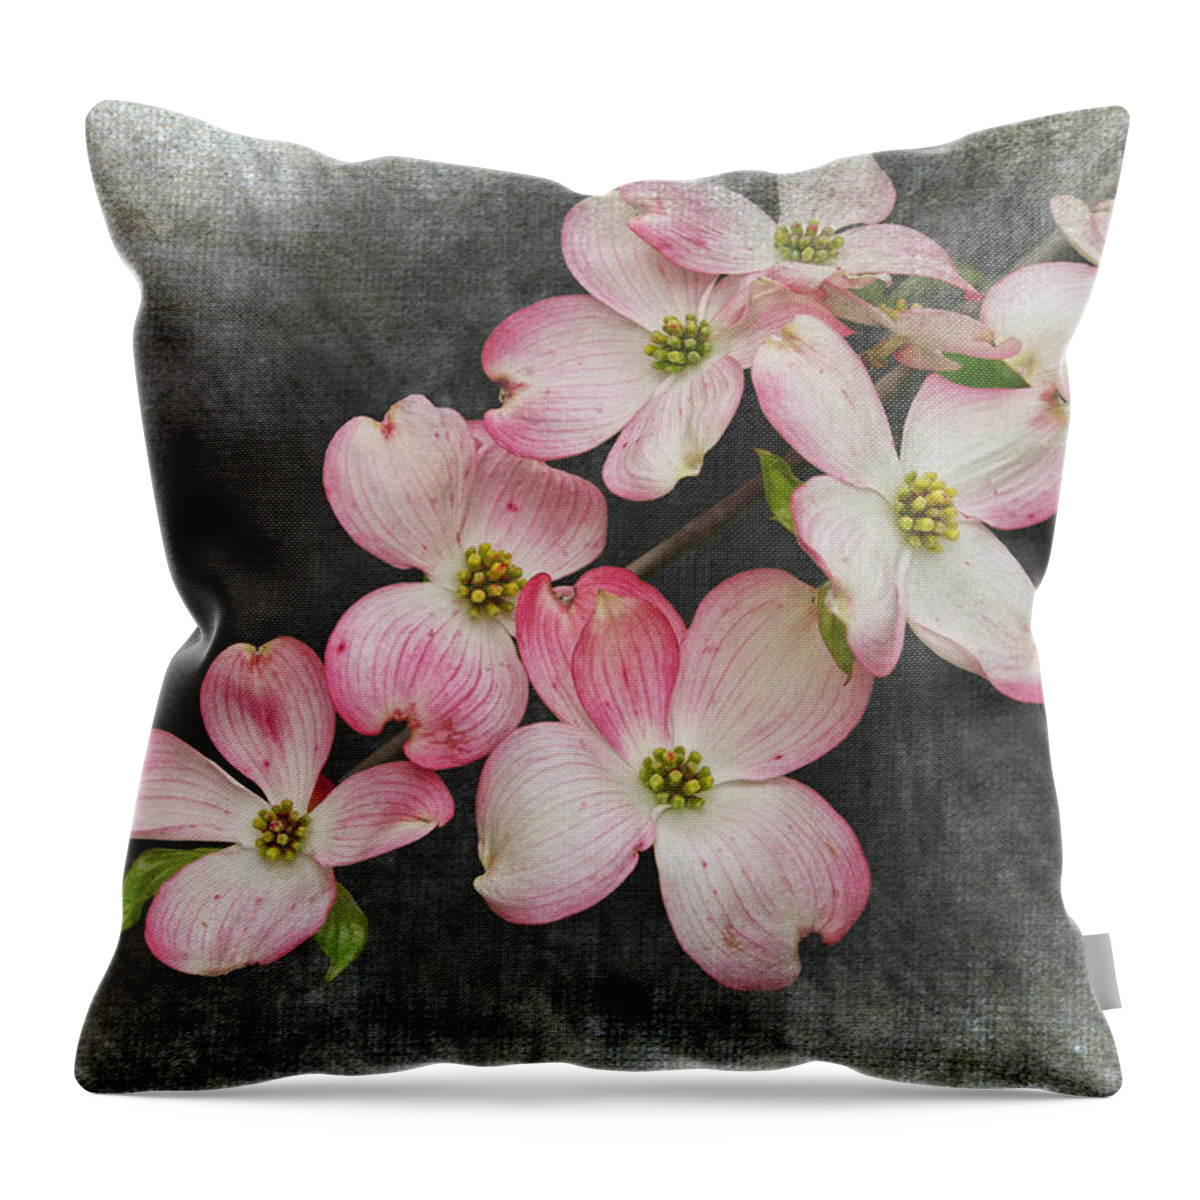 Art Throw Pillow featuring the photograph Pink and White Dogwood Tree Blossoms by Randall Nyhof